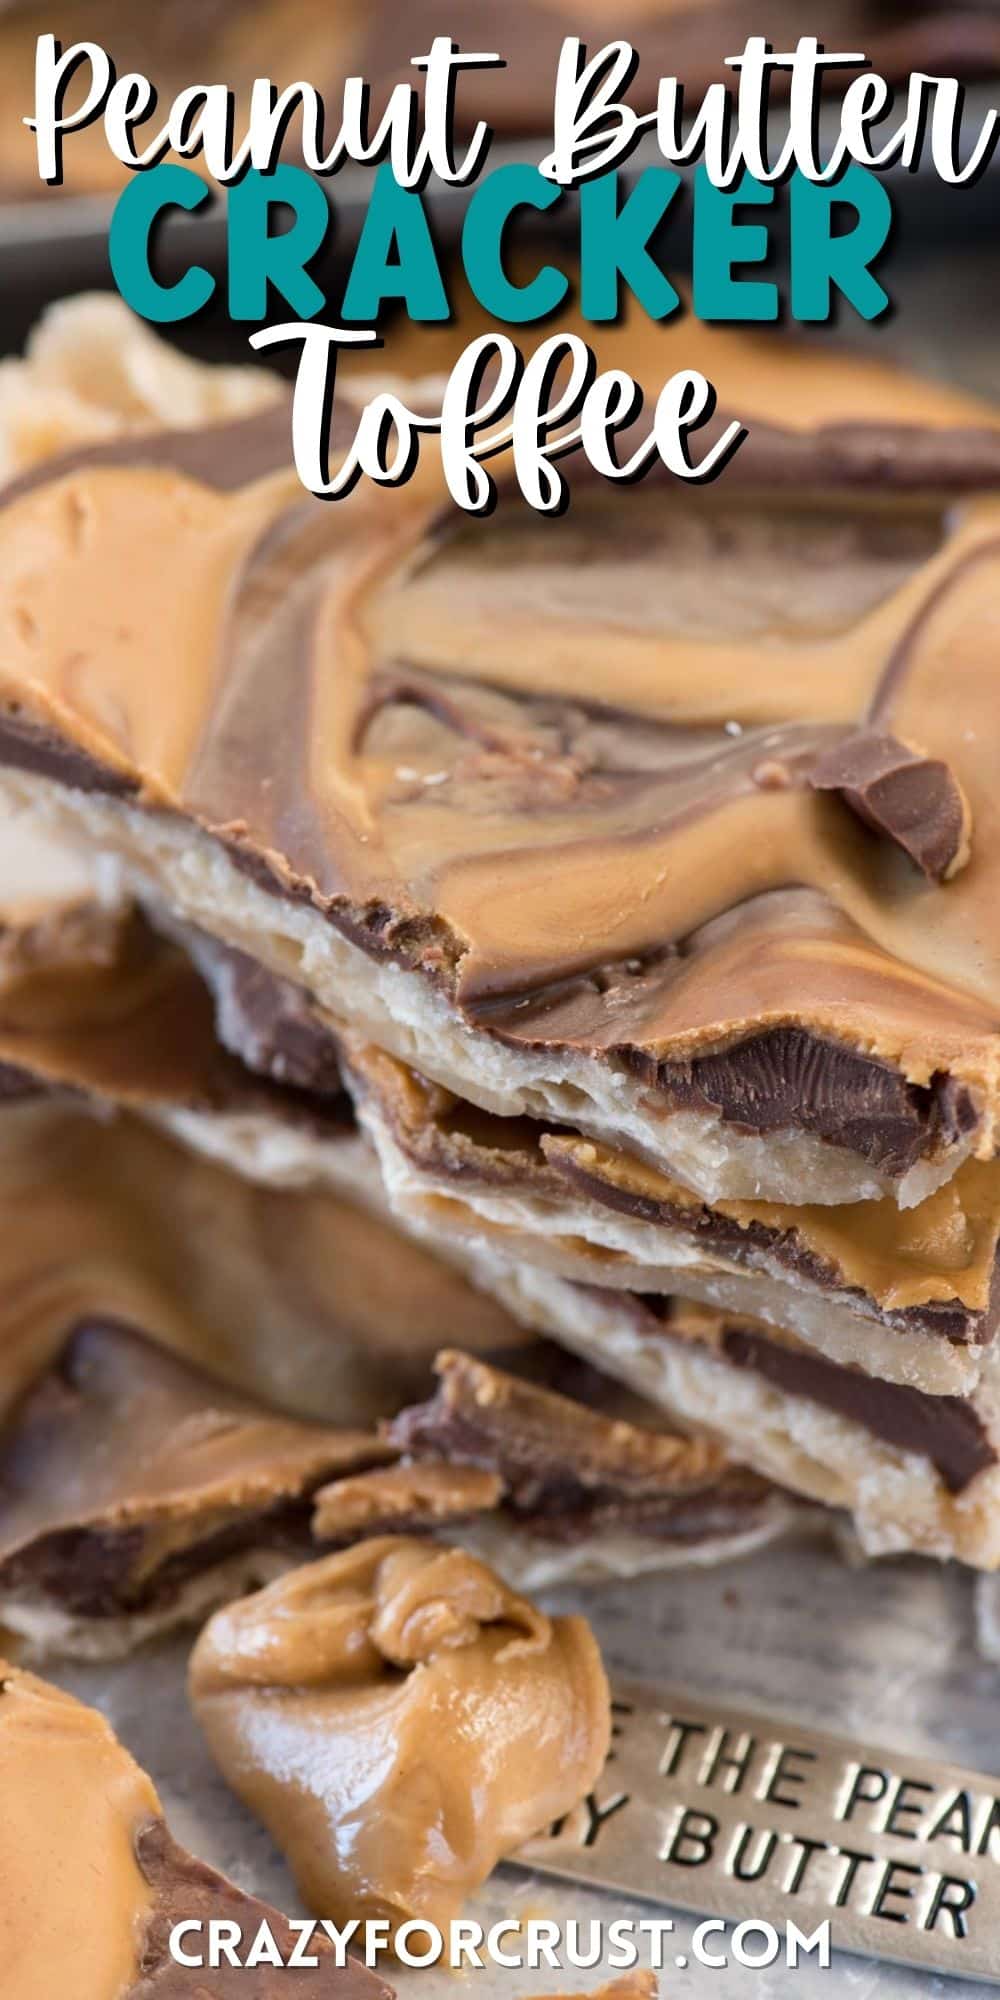 peanut butter and chocolate swirled together on top of a cracker with words on top of the image